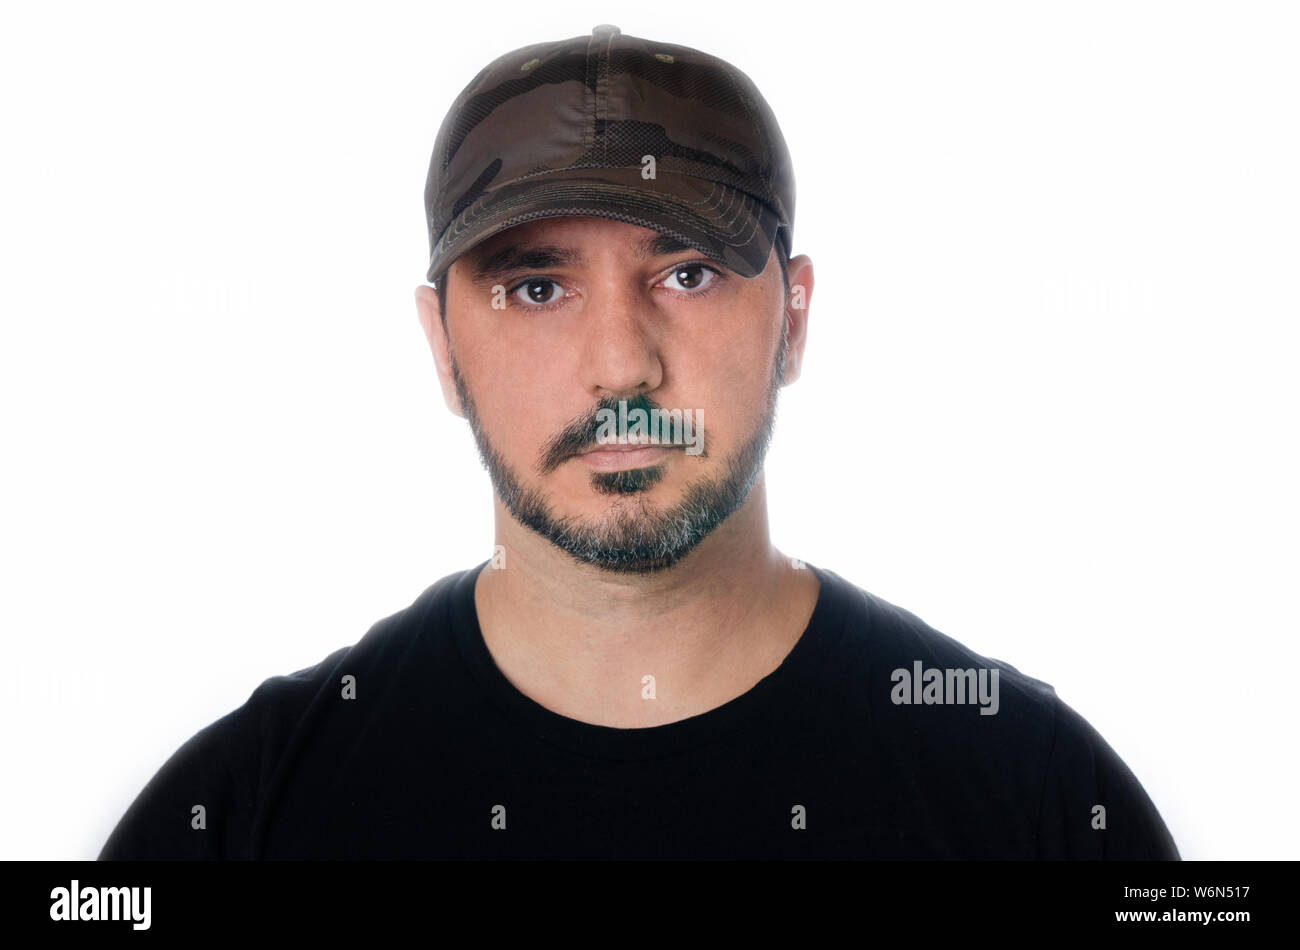 Serious man with camouflage cap on white background Stock Photo